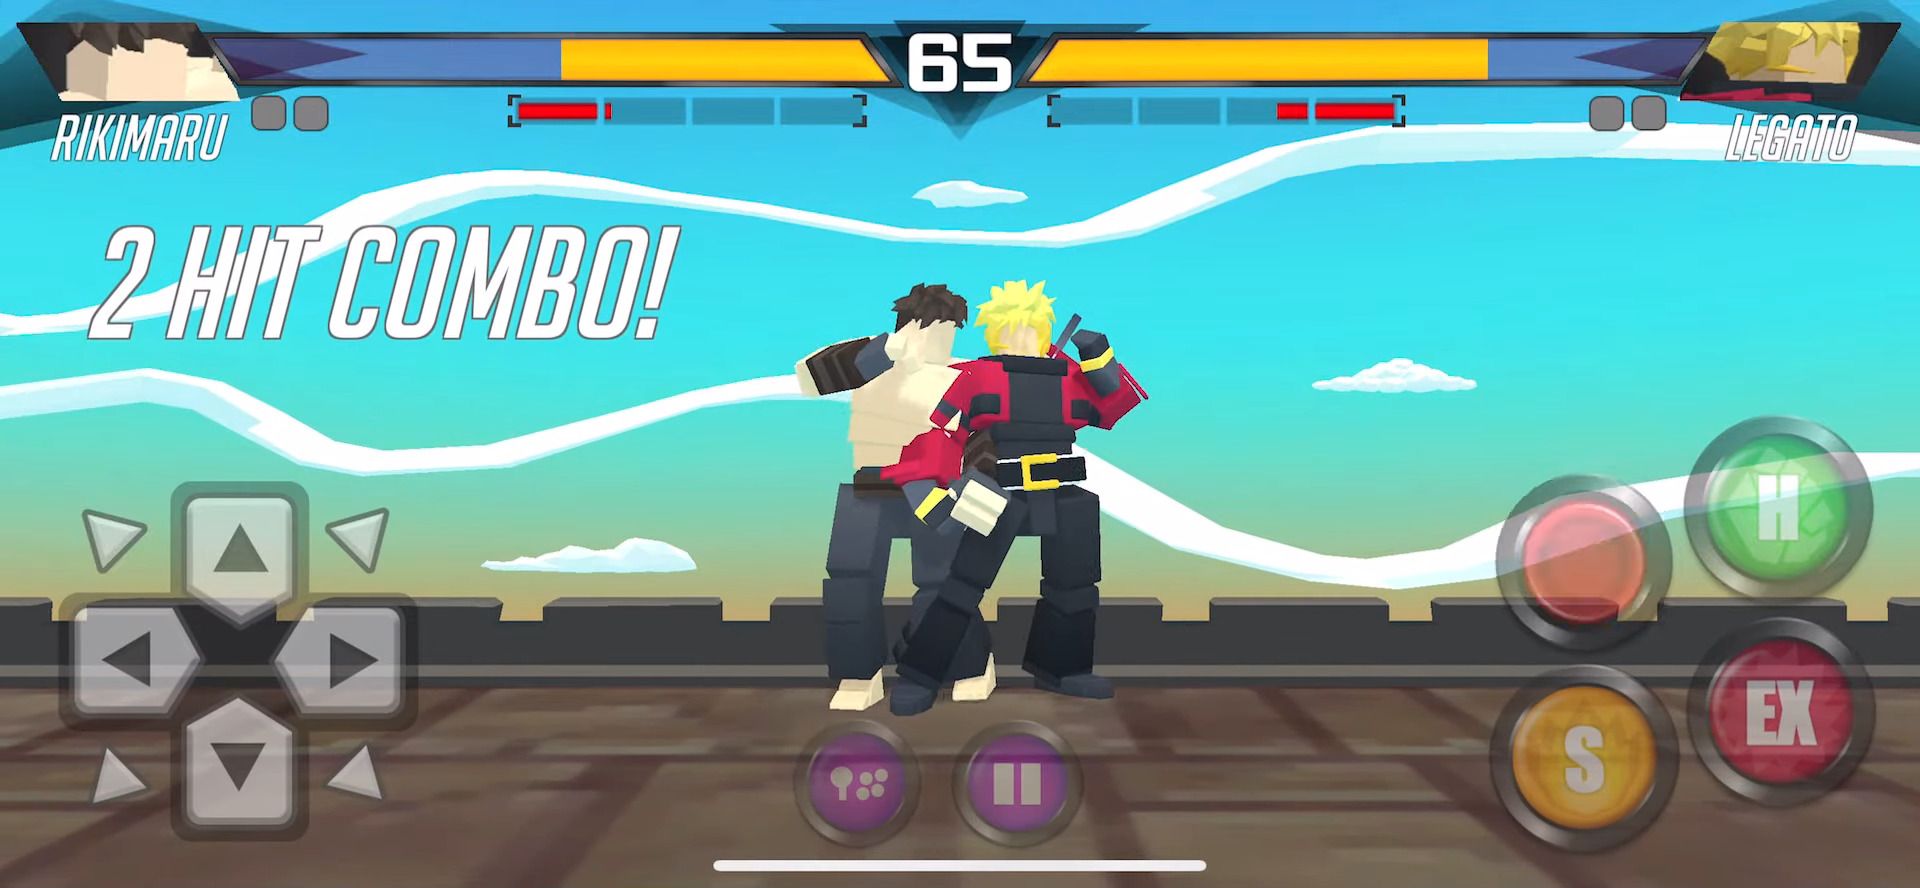 Full version of Android Fighting game apk Vita Fighters for tablet and phone.